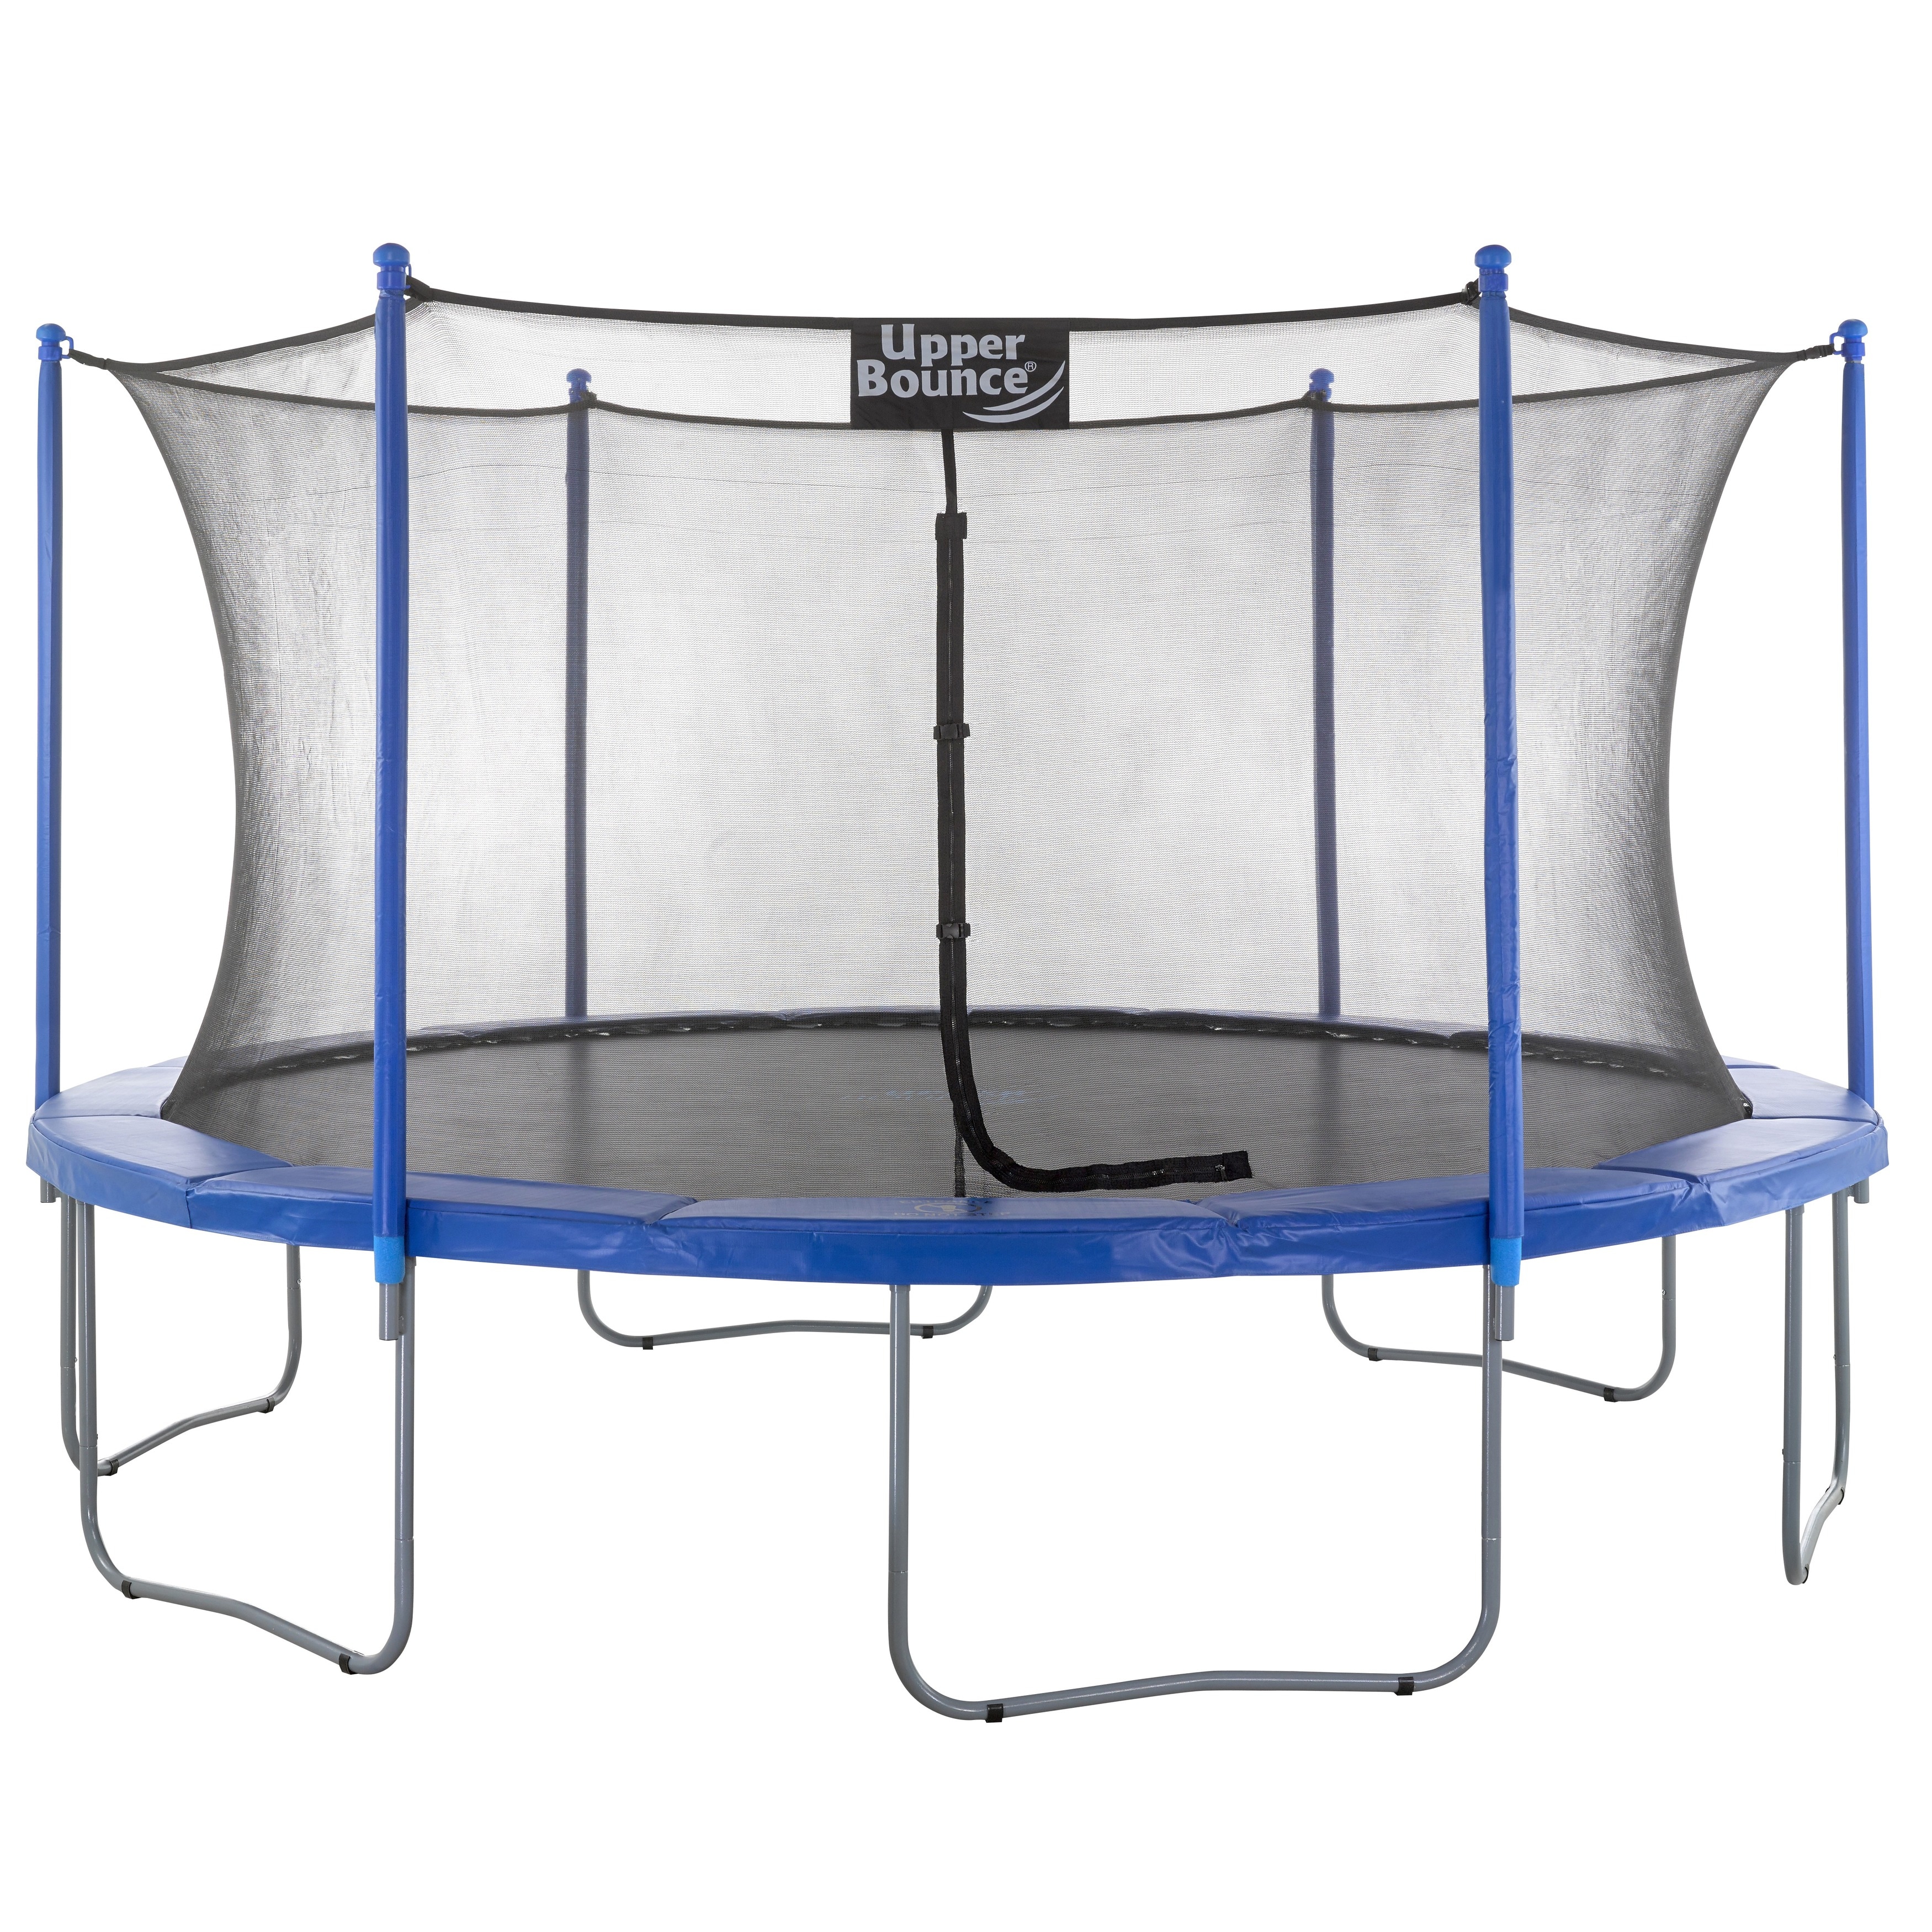 Upper Bounce Trampoline And Enclosure Set With Easy Assemble (15 Foot)